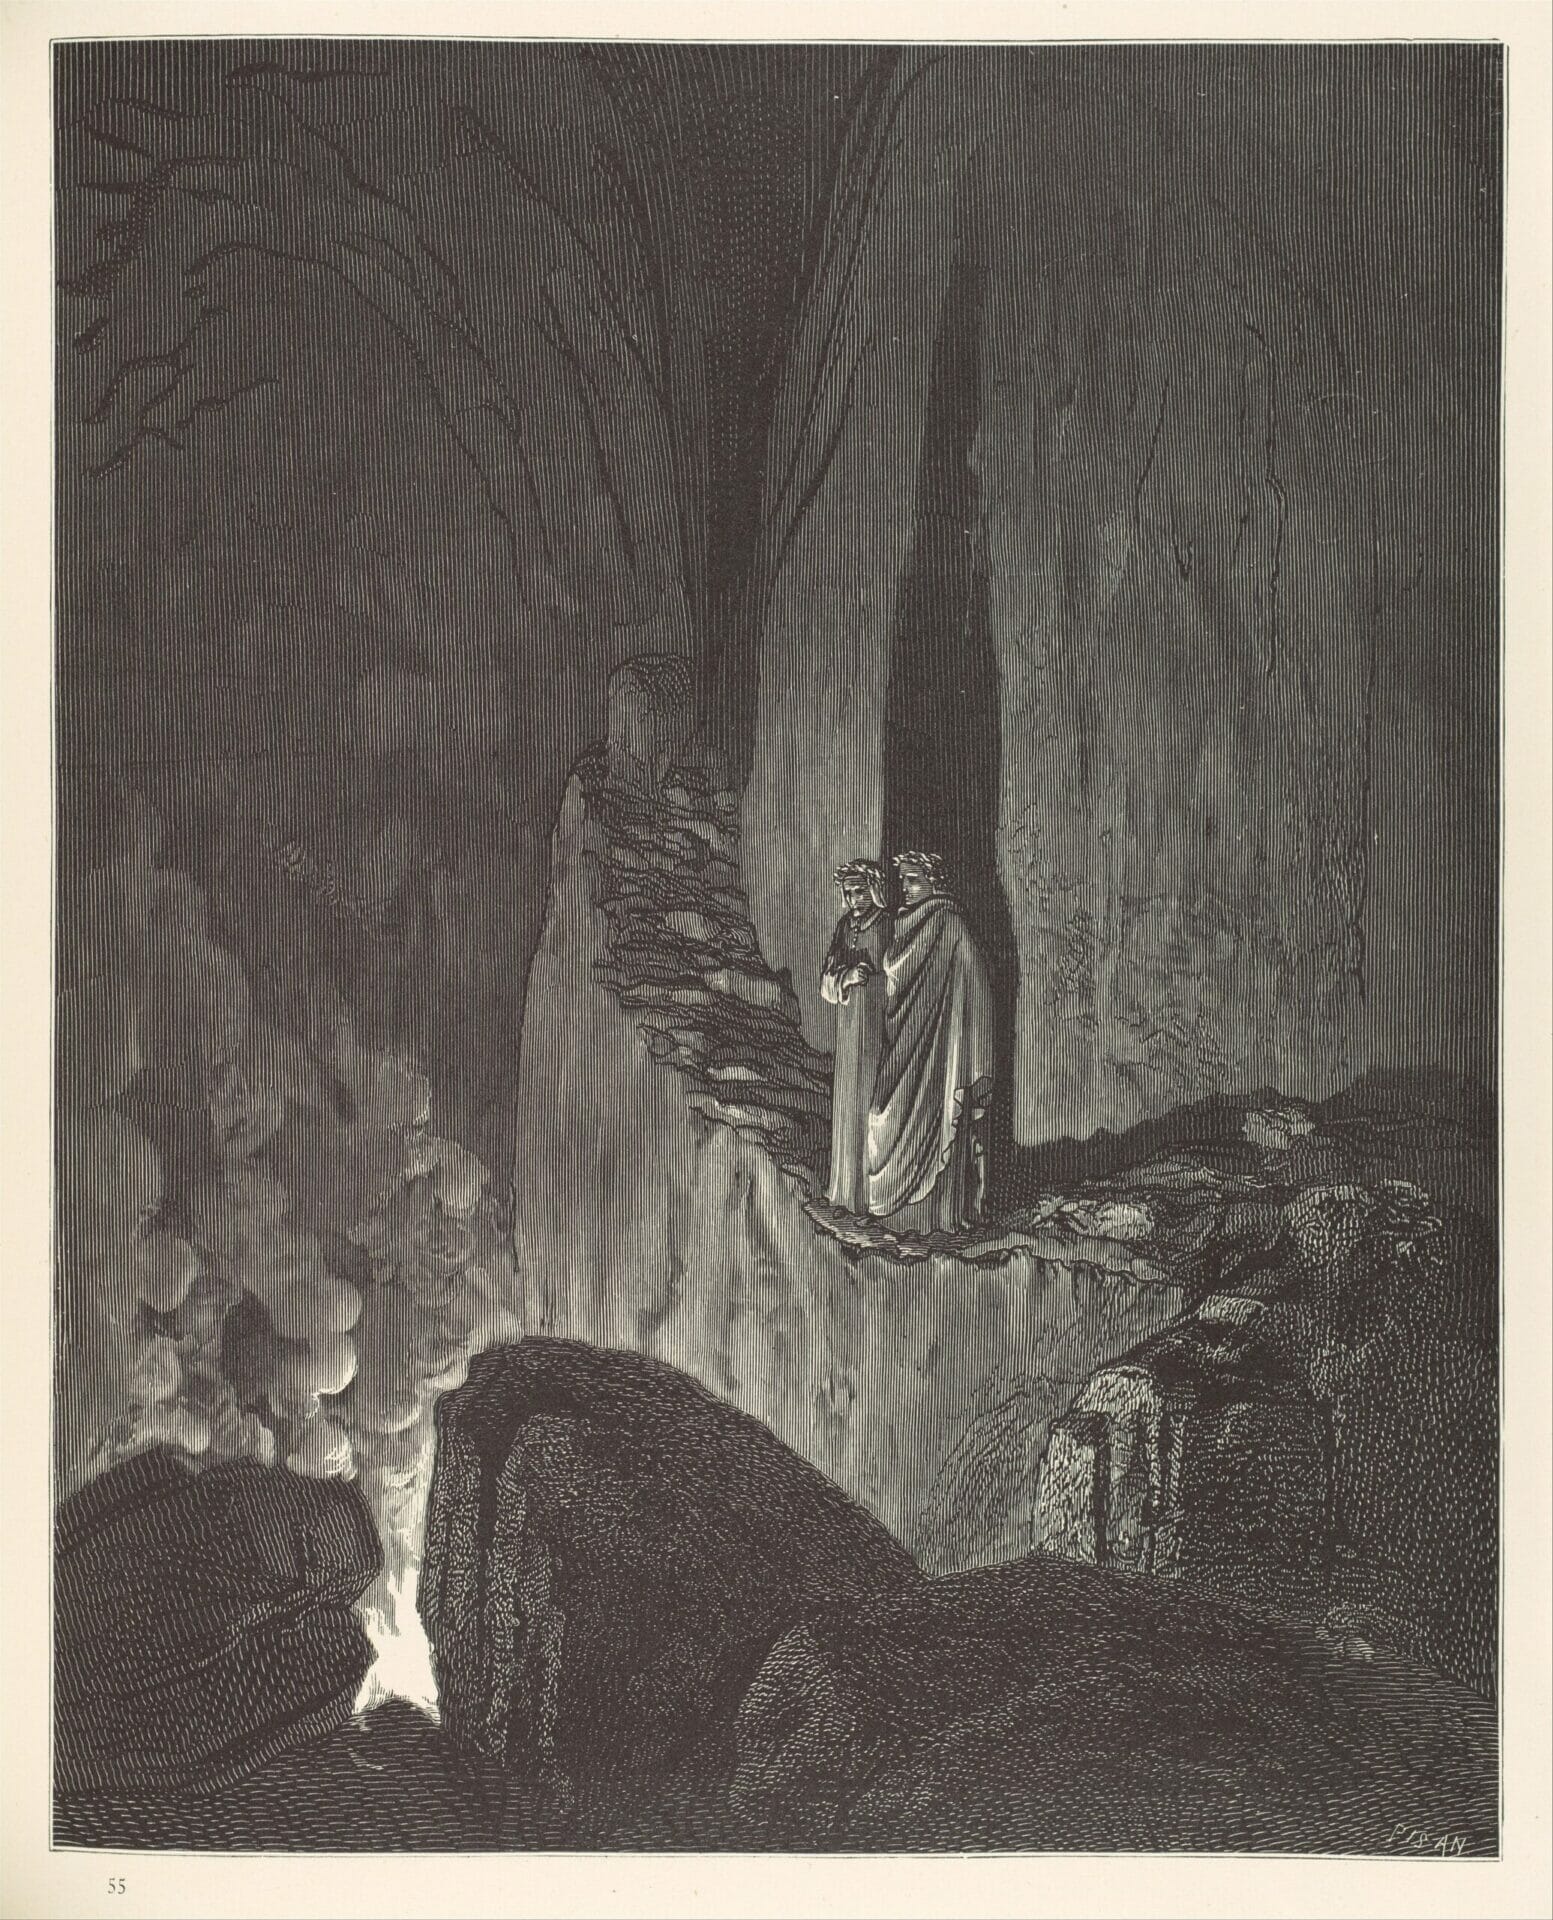 Doré and the horror vacui in Dante's Divine Comedy - An illustration